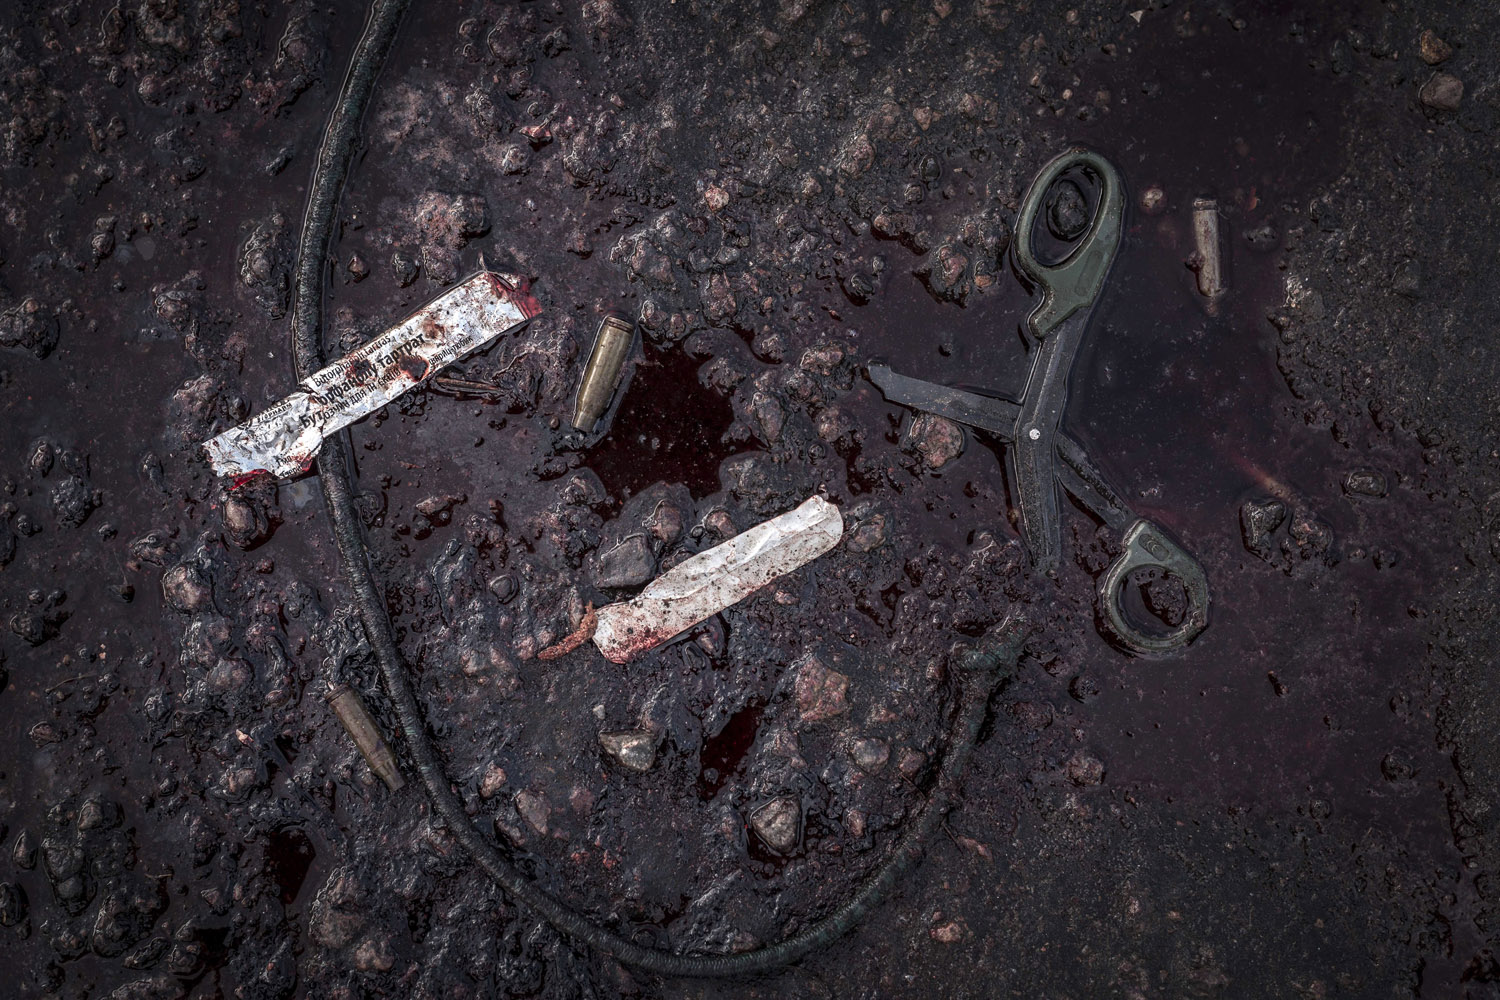 Bullet casings, scissors and the wrapper to a tourniquet lie in a puddle of blood on the outskirts of Slovyansk, eastern Ukraine.